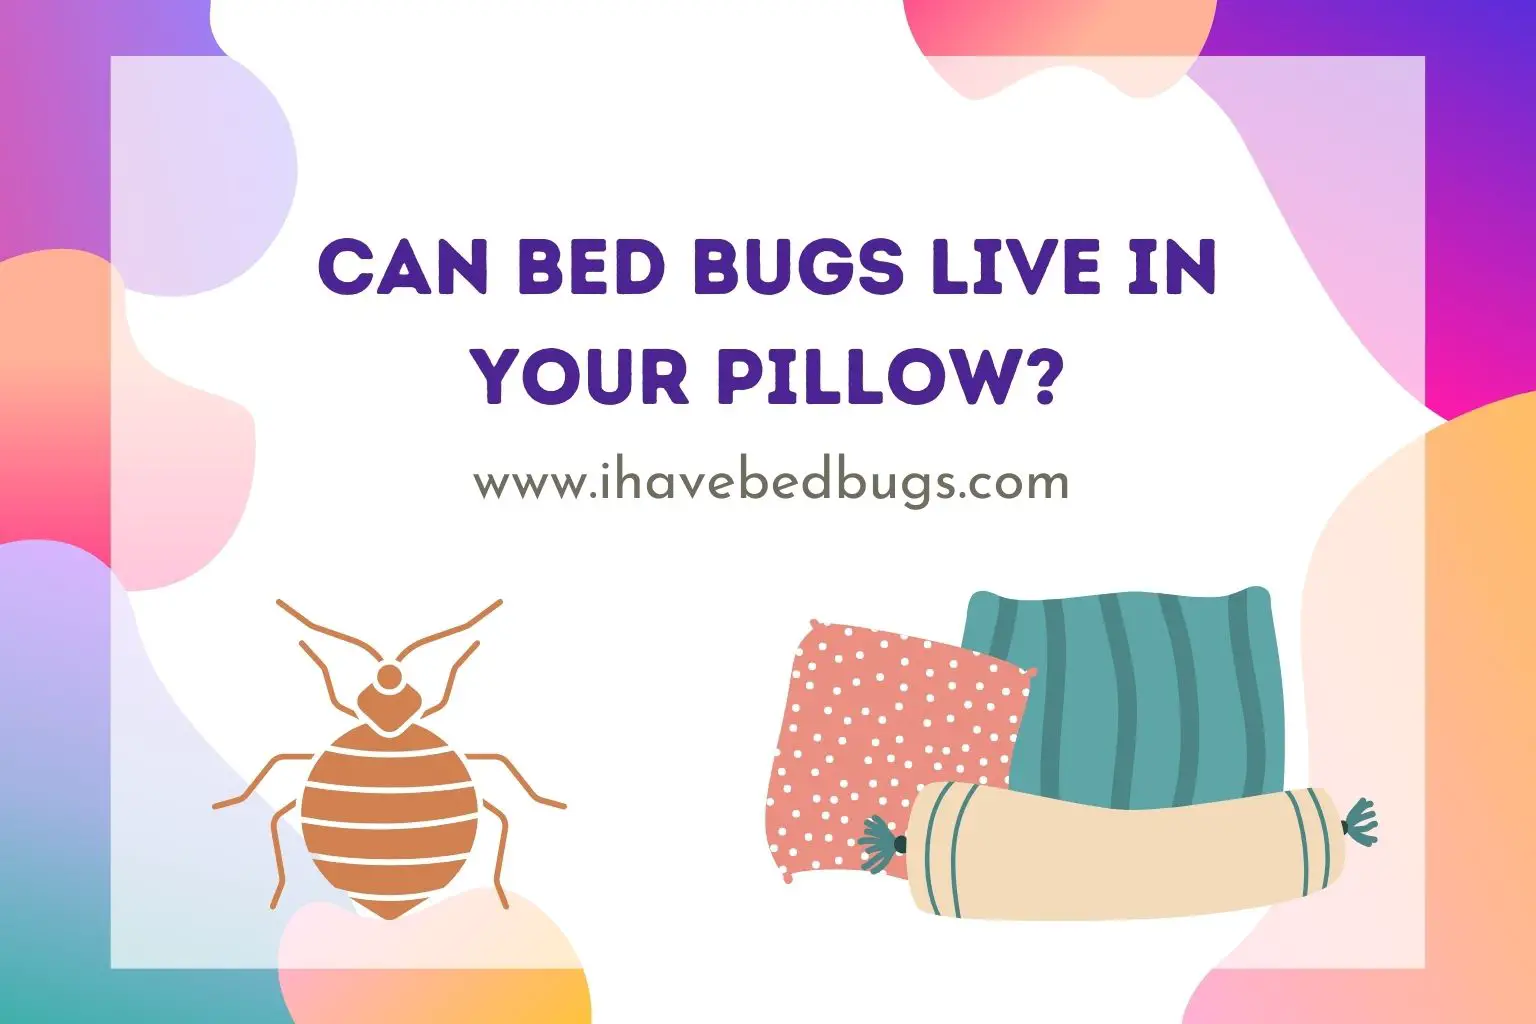 Can bed bugs live in your pillow